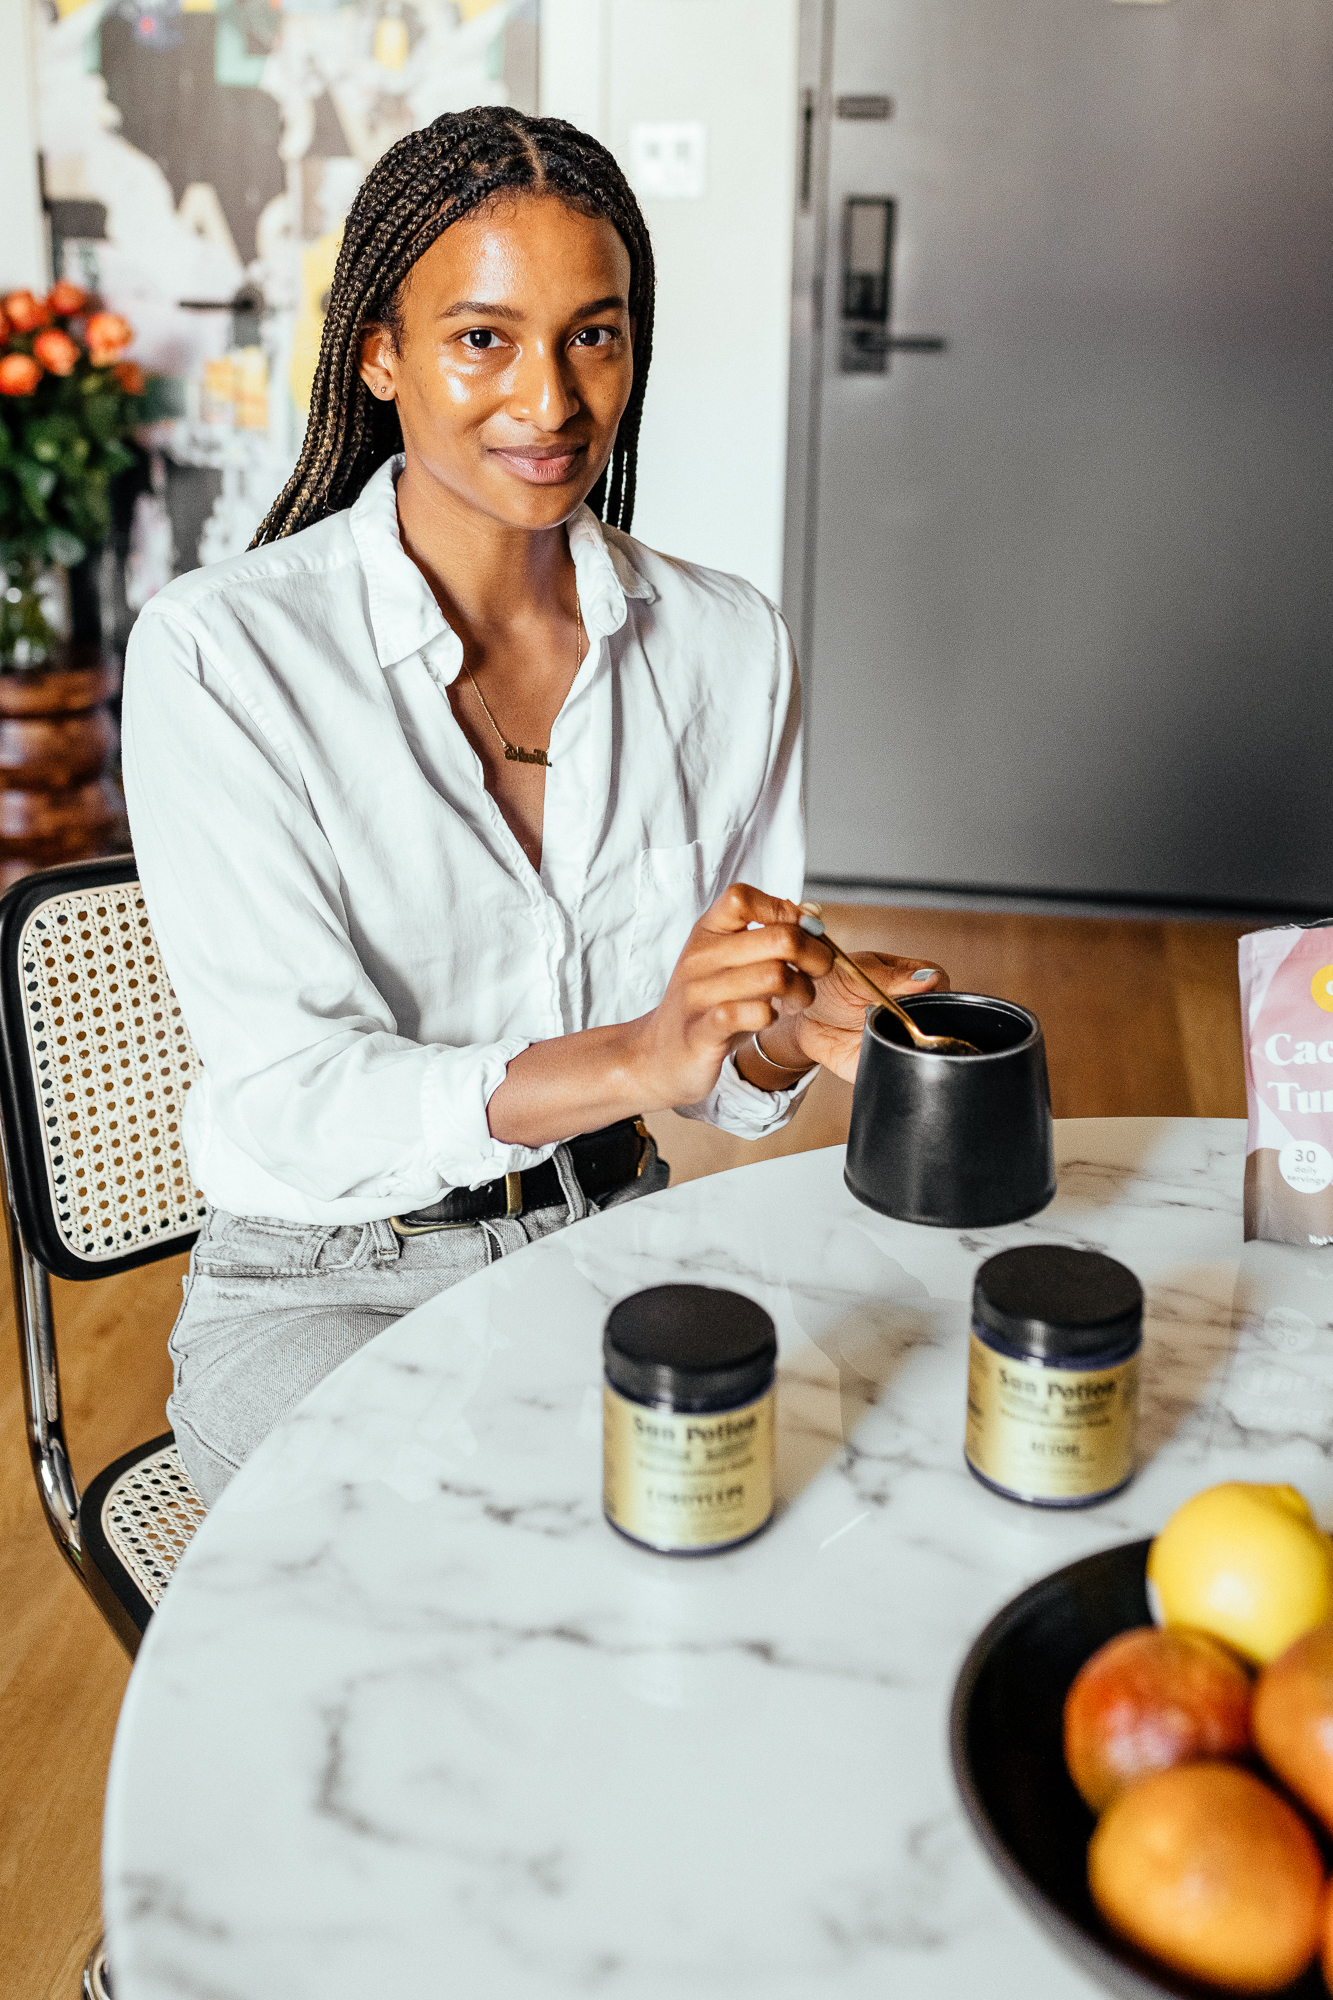 Shanika Hillocks' Morning Routine Is Filled With Intention